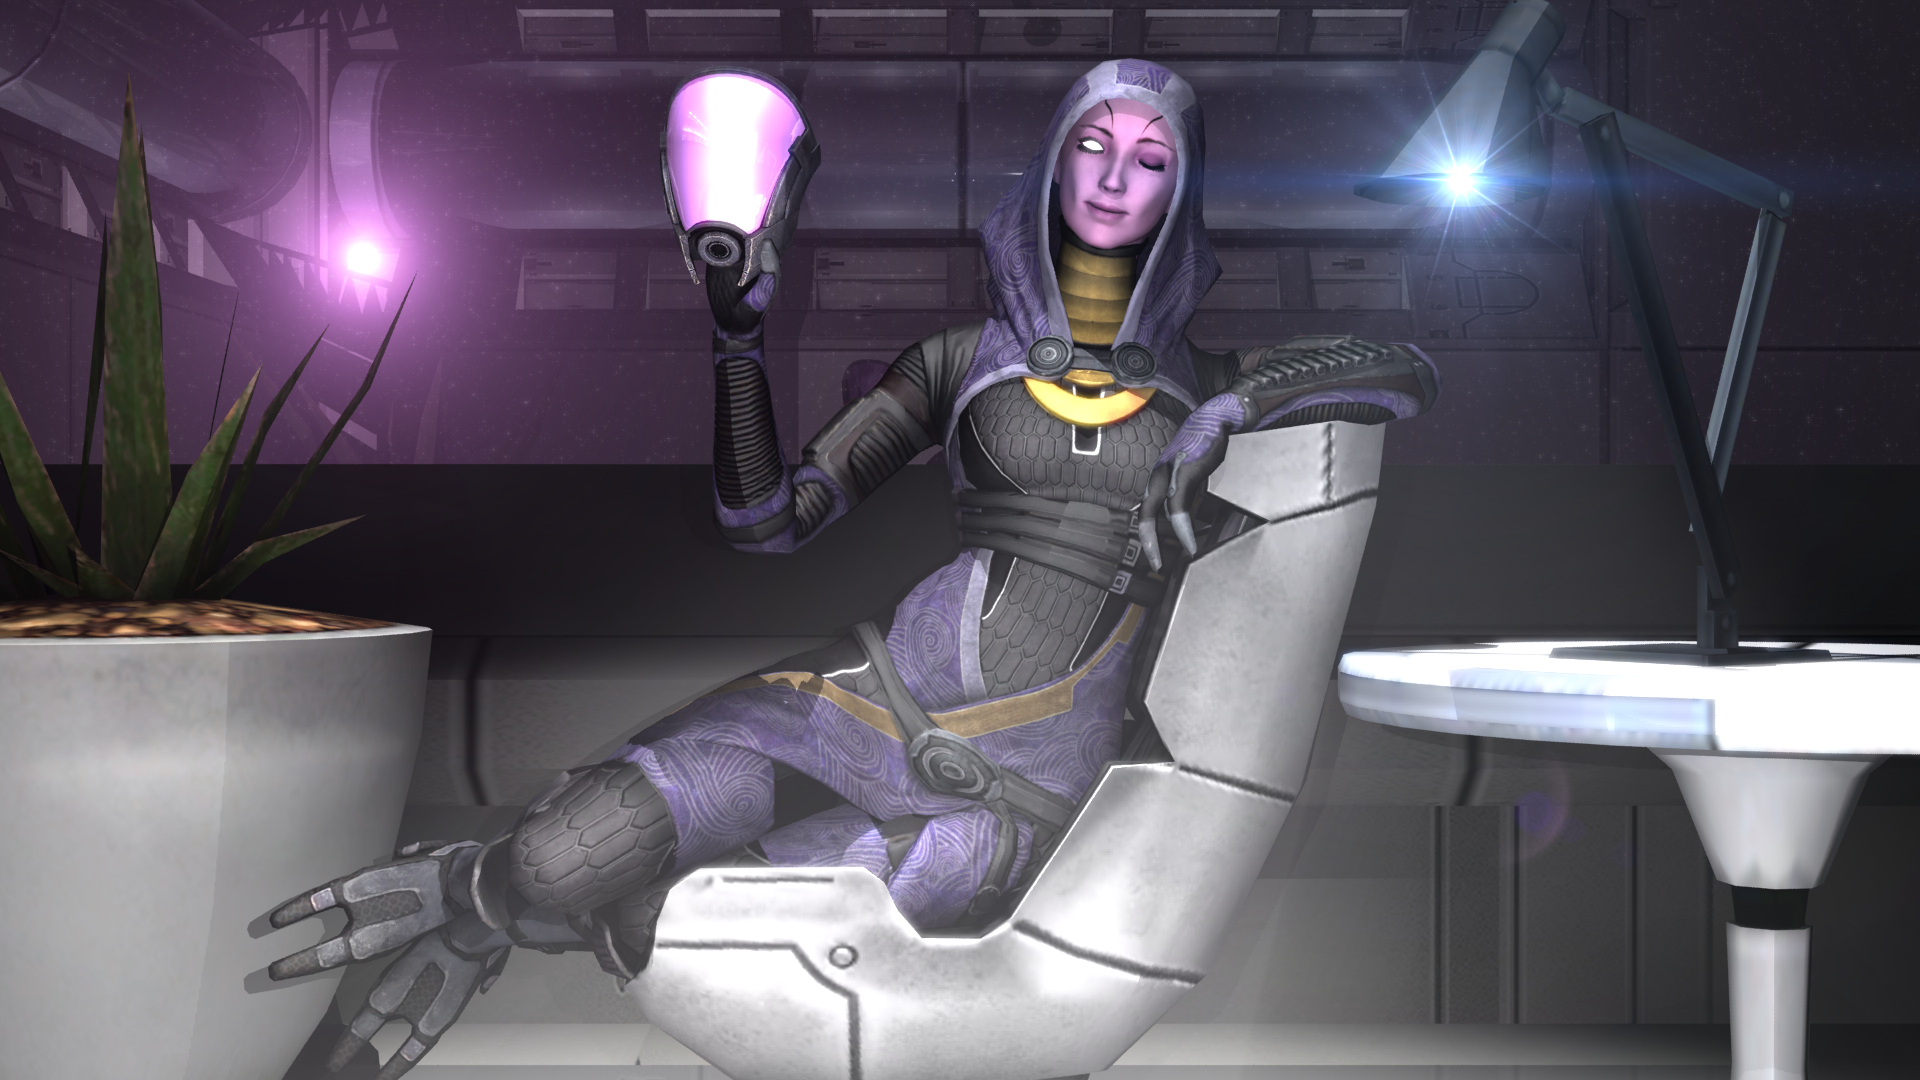 tali_pose_by_slipperyhammer-d5gxvg0.png